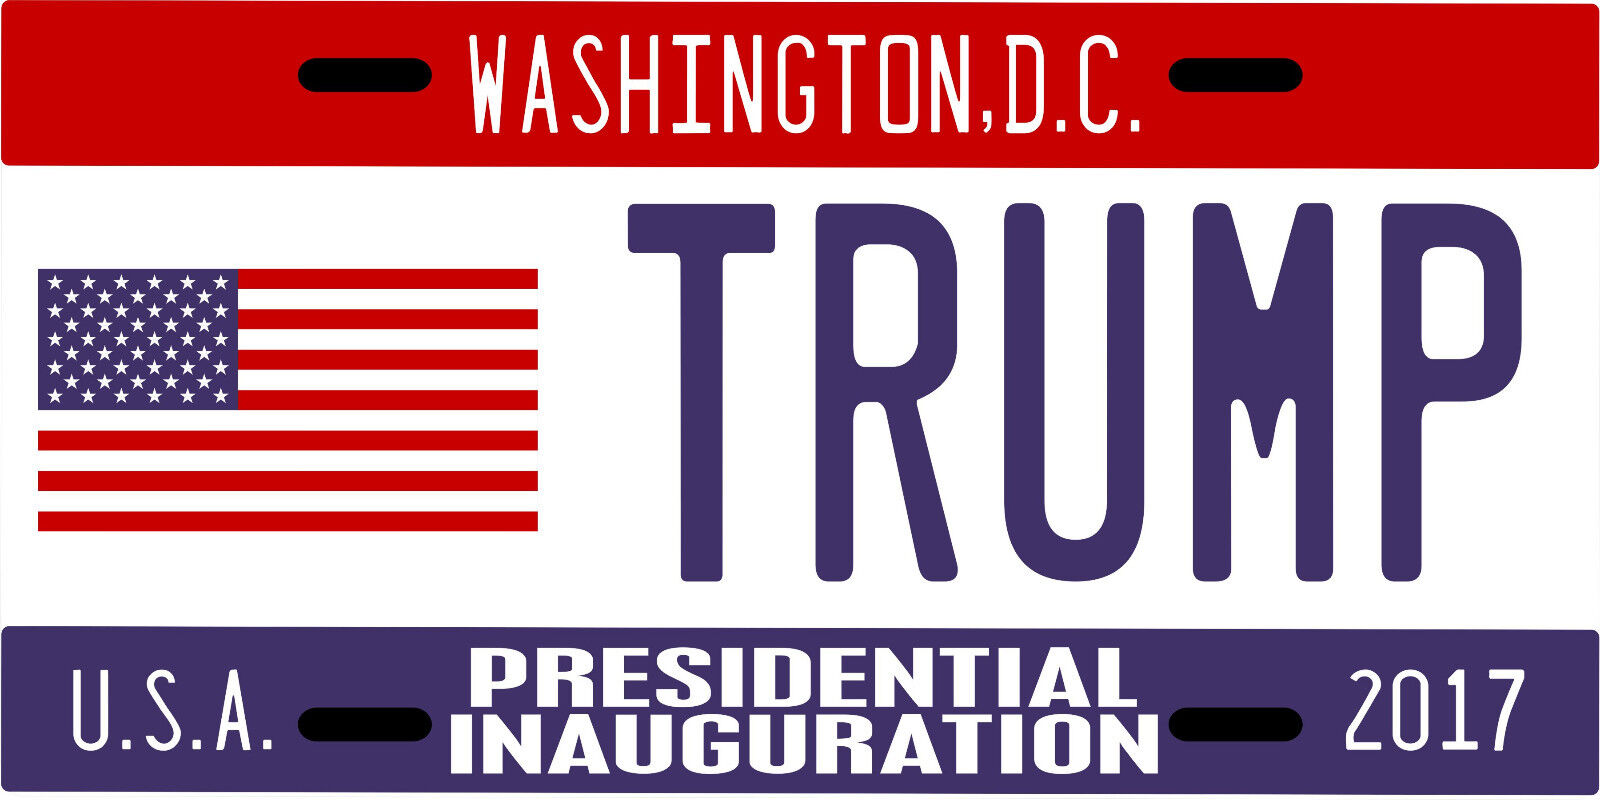 Donald Trump for President inauguration License plate